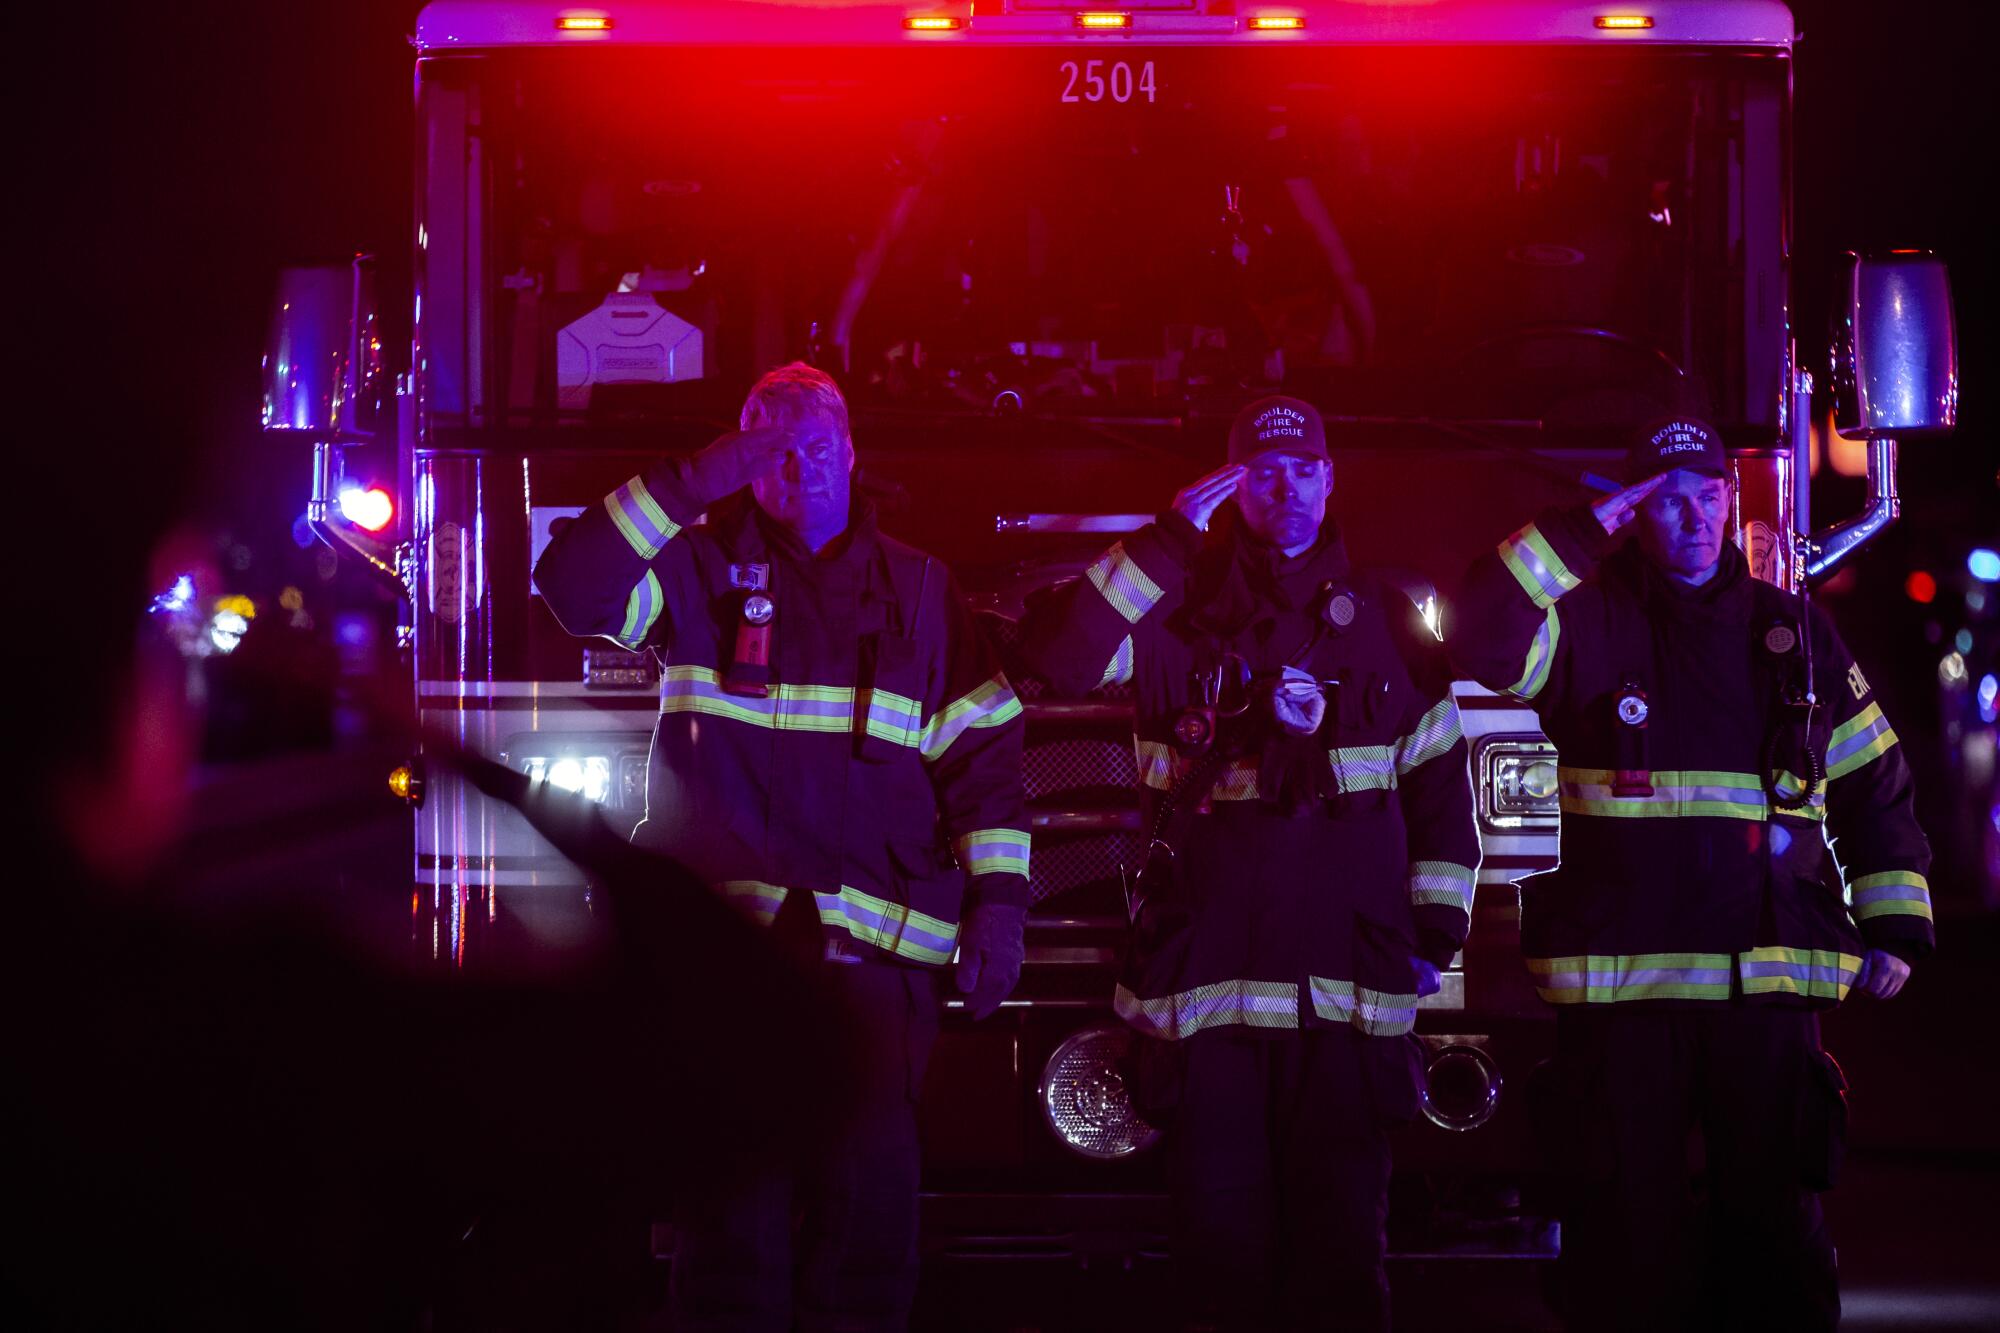 Firefighters salute as a procession carrying the body of a police officer leaves King Sooper's grocery store